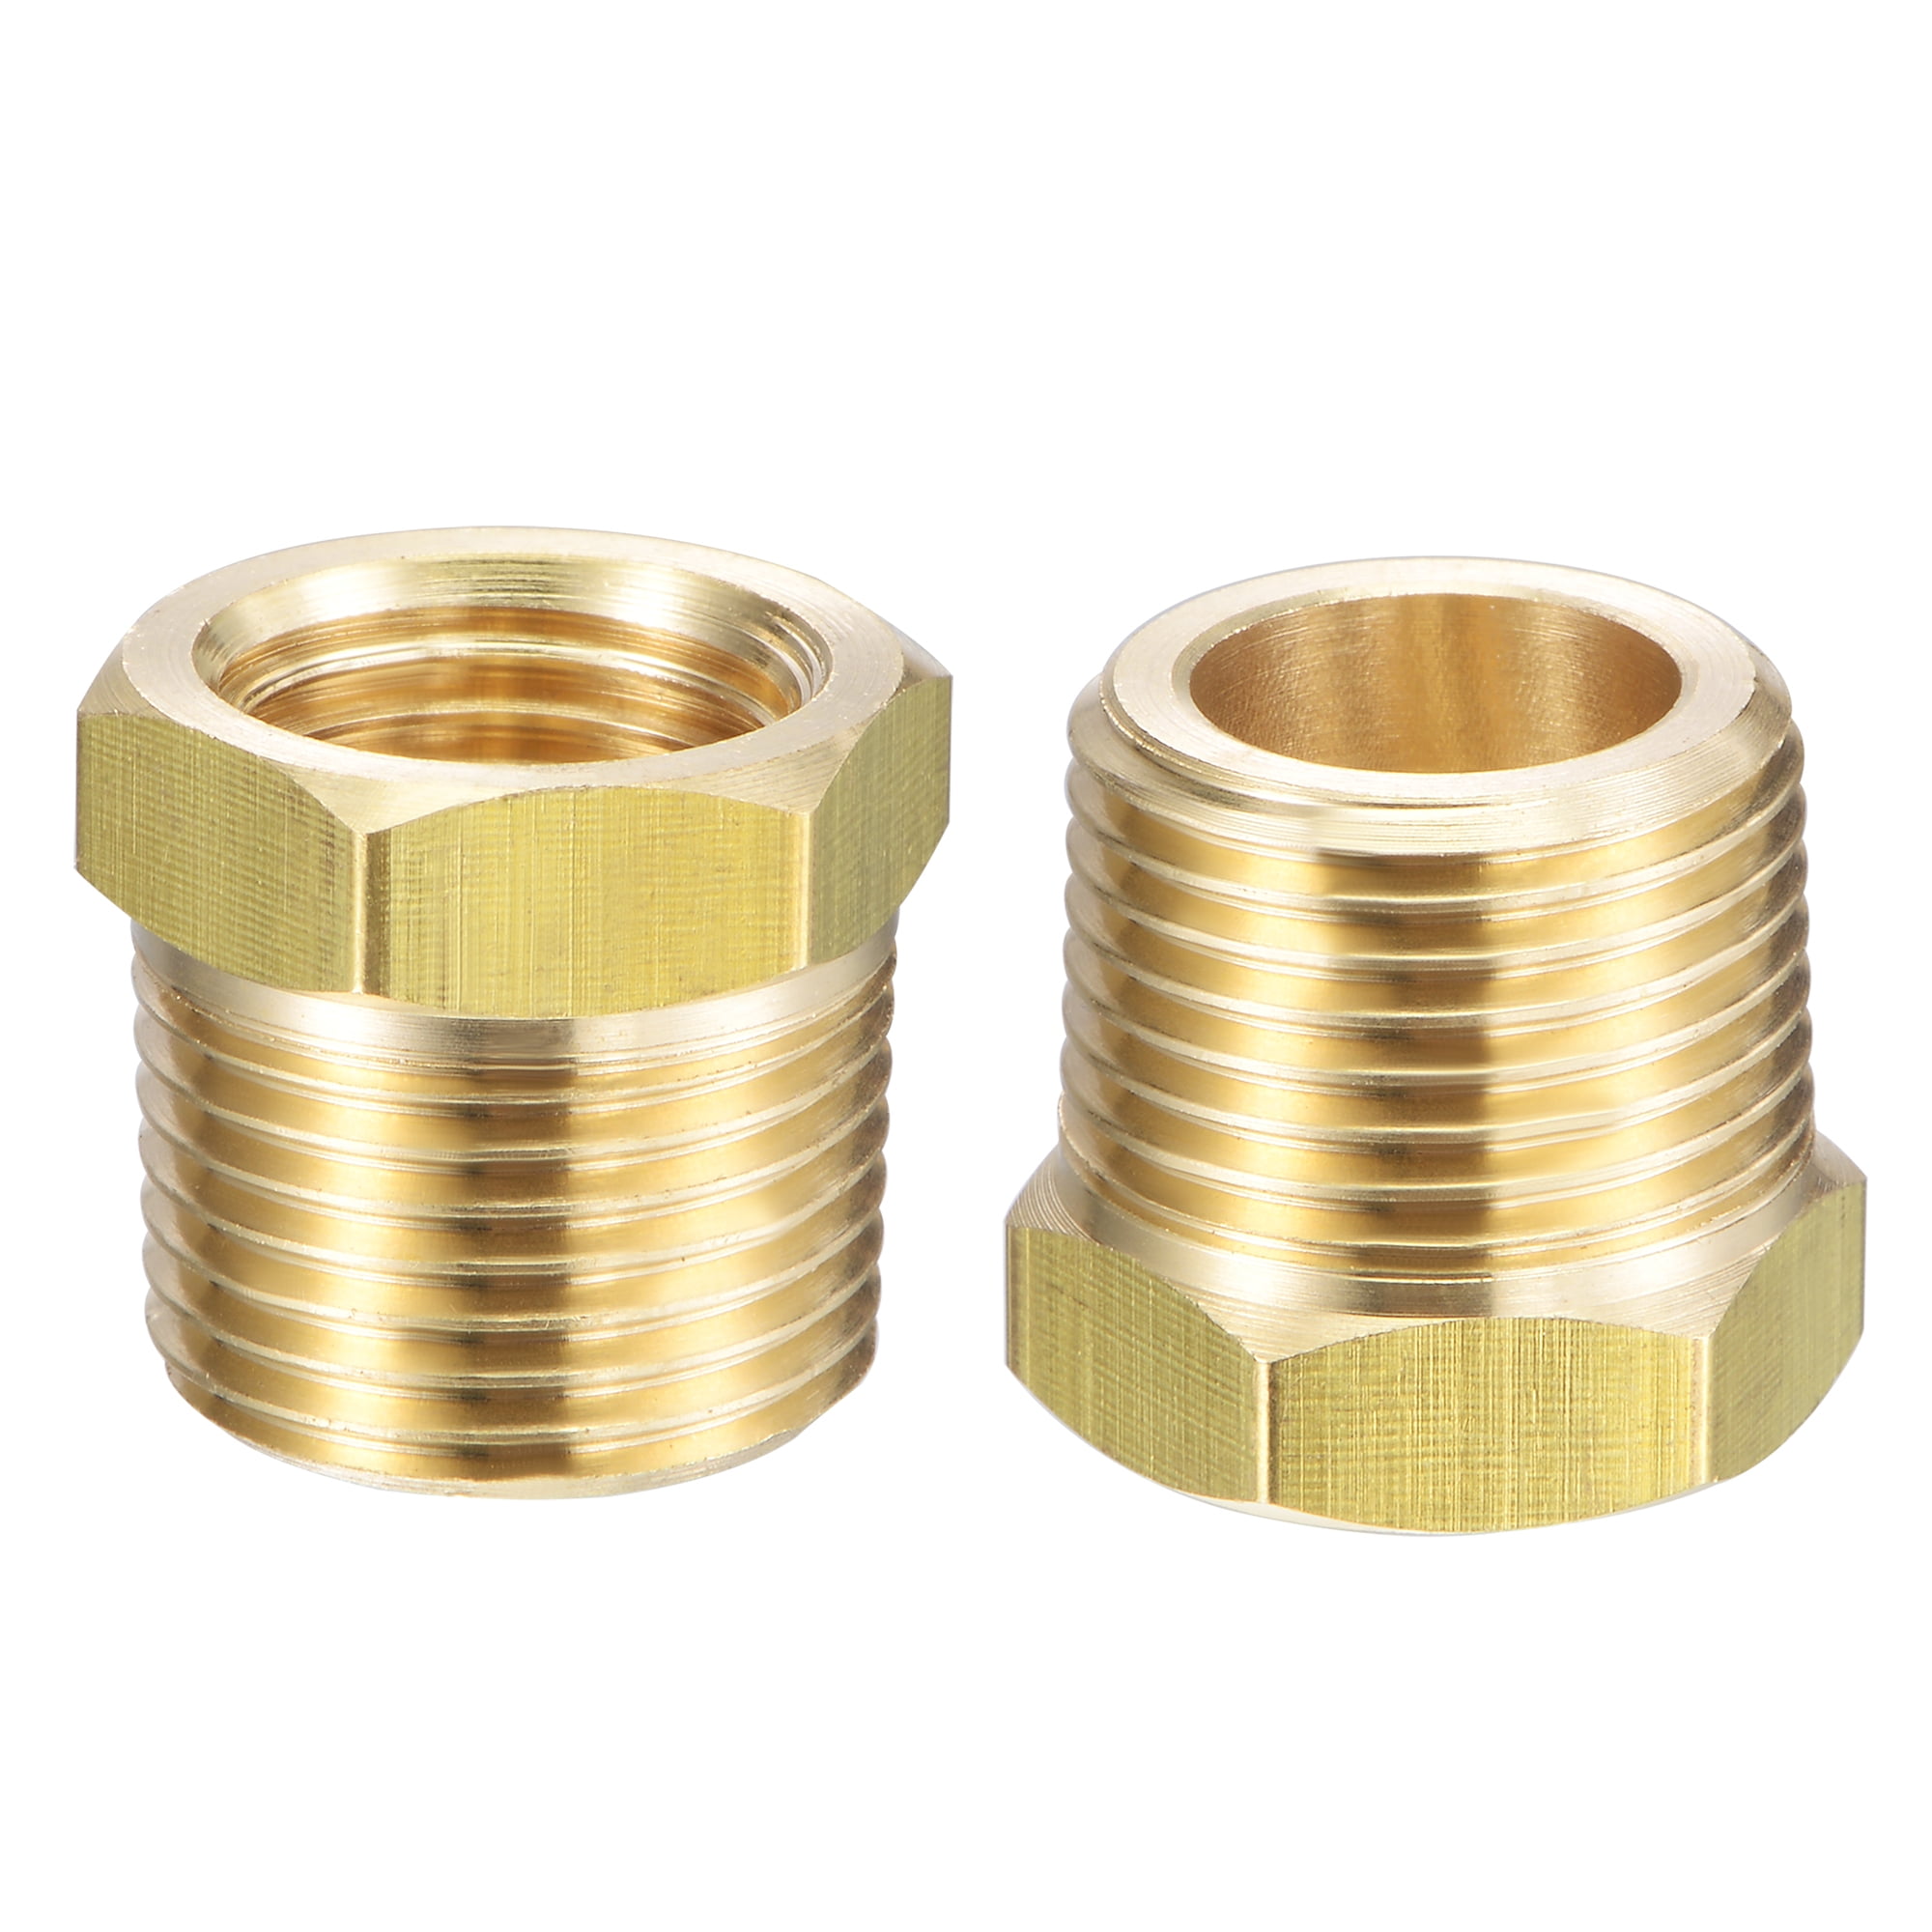 Universal Pipe Adapter Brass 1/4"Female NPT To 1/8"Male BSPT Water Oil Gas Mini 